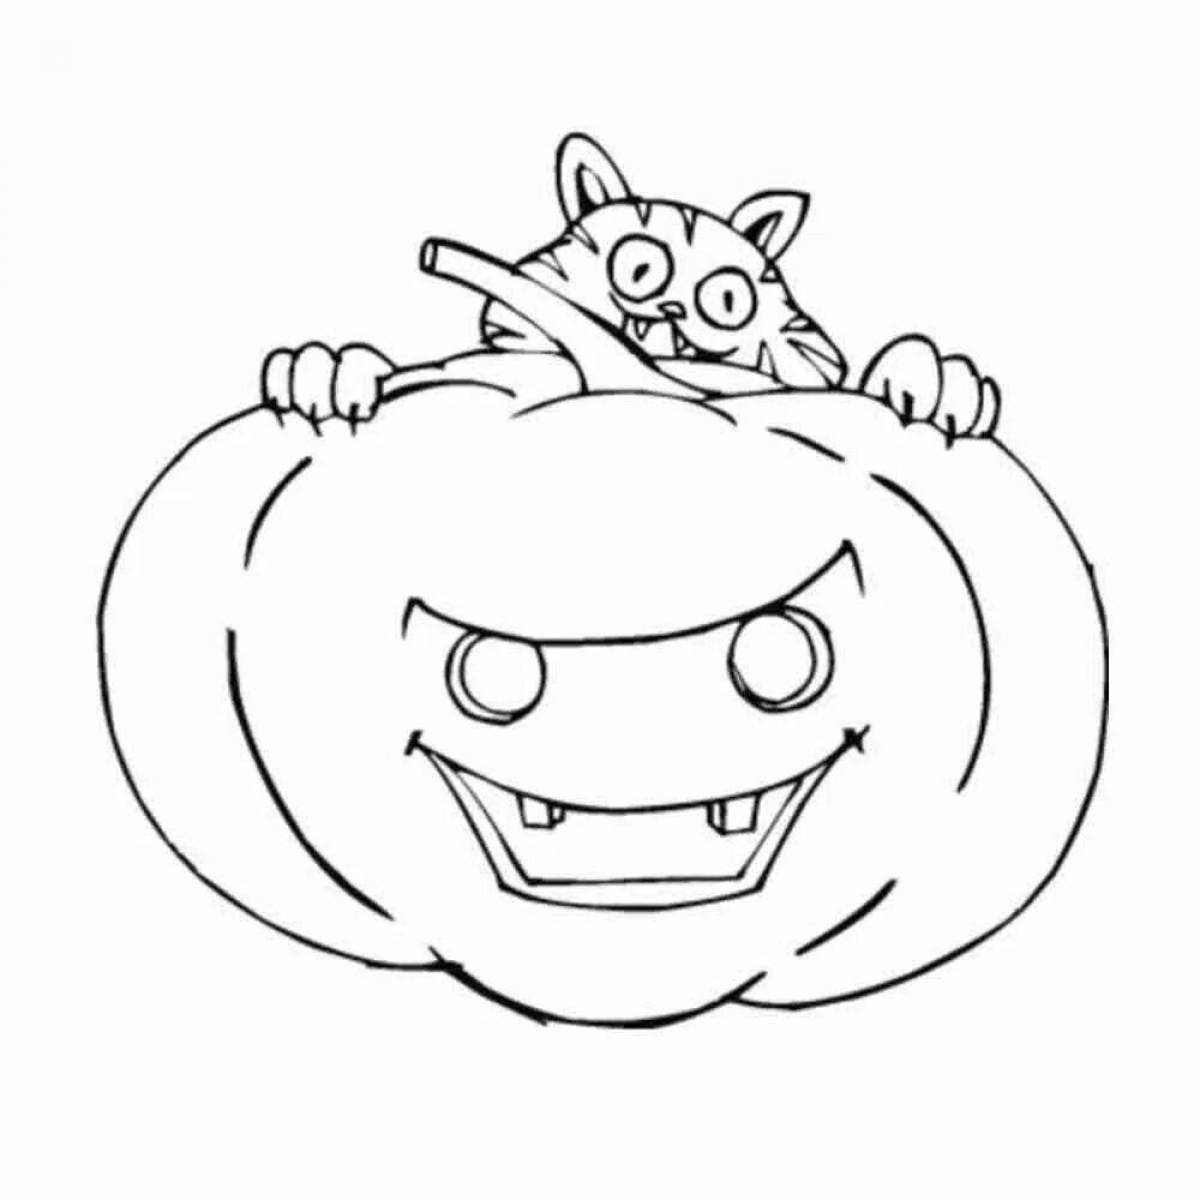 Coloring page annoyed angry cat